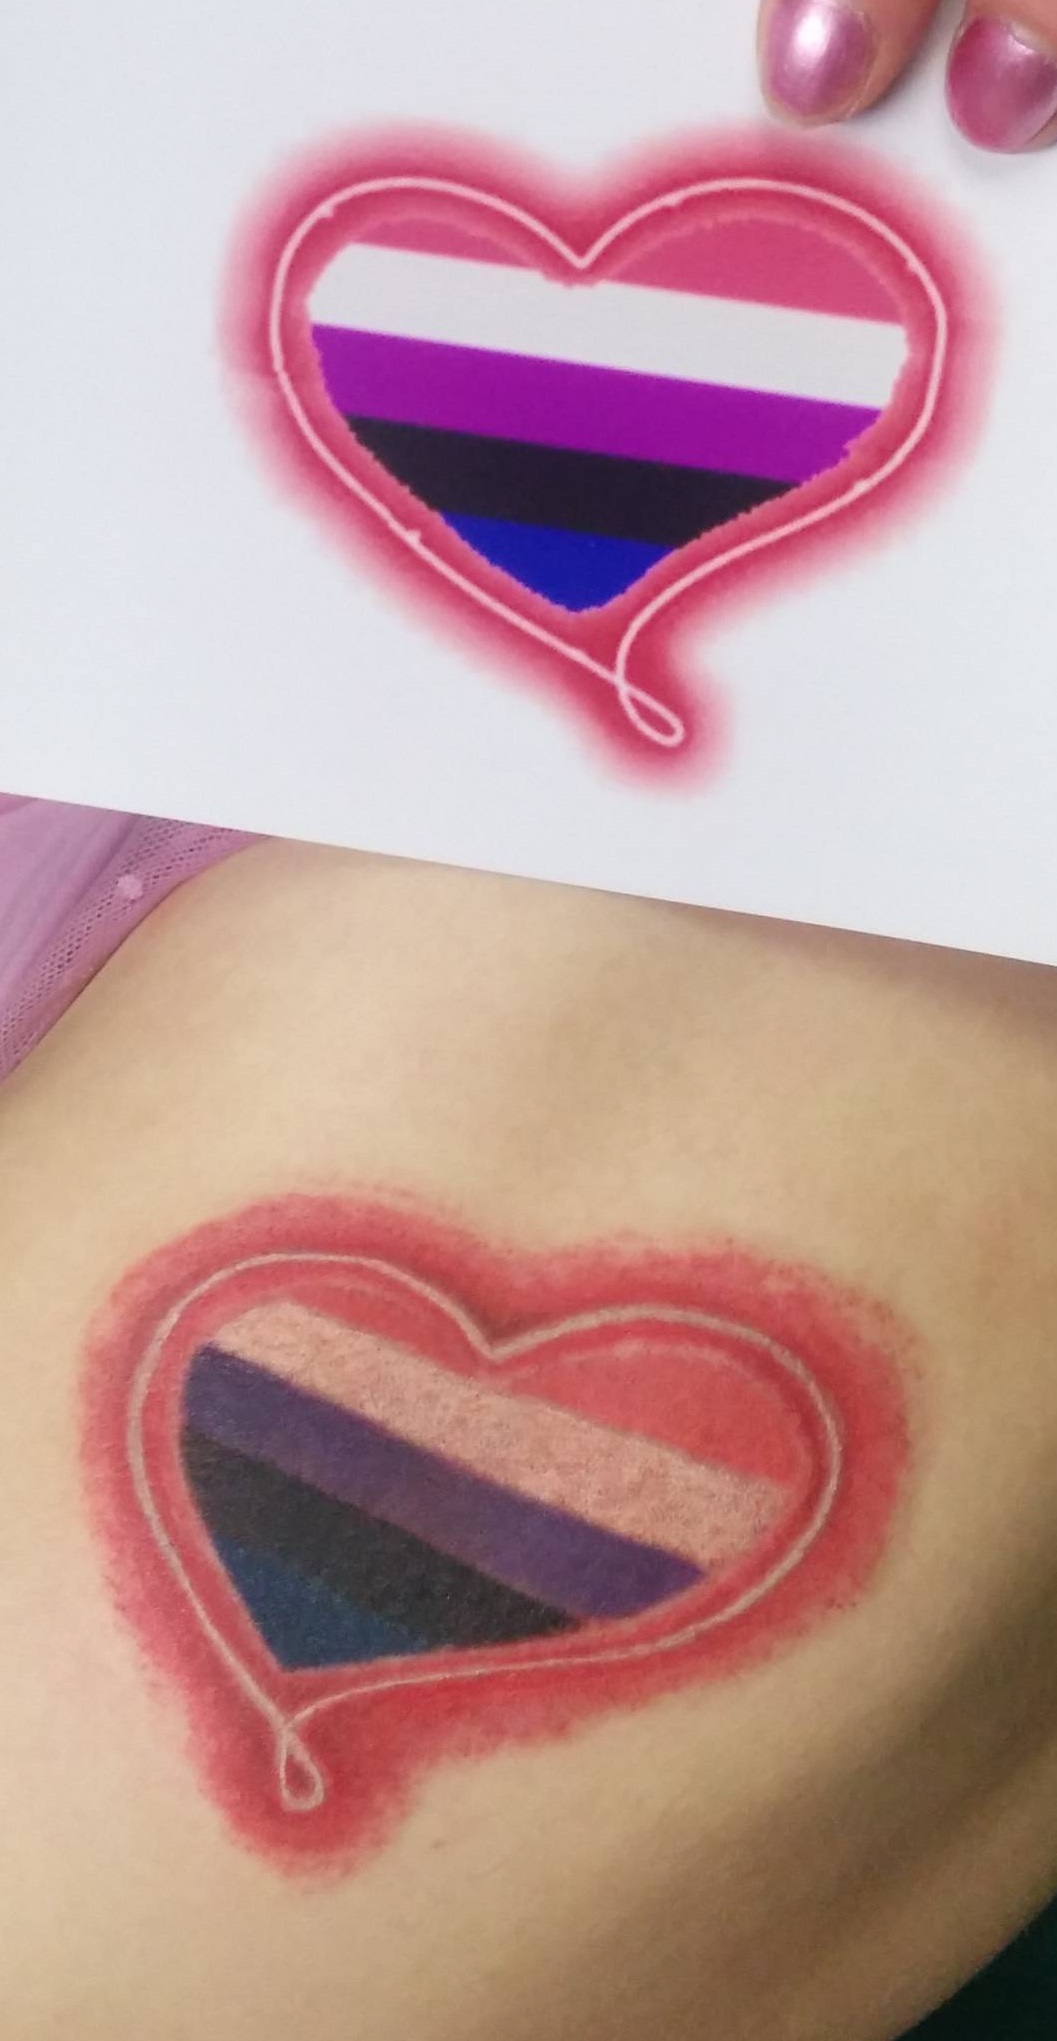 The printout of the flag inside the heart, above the tattoo of it on Kabutroid's hip.